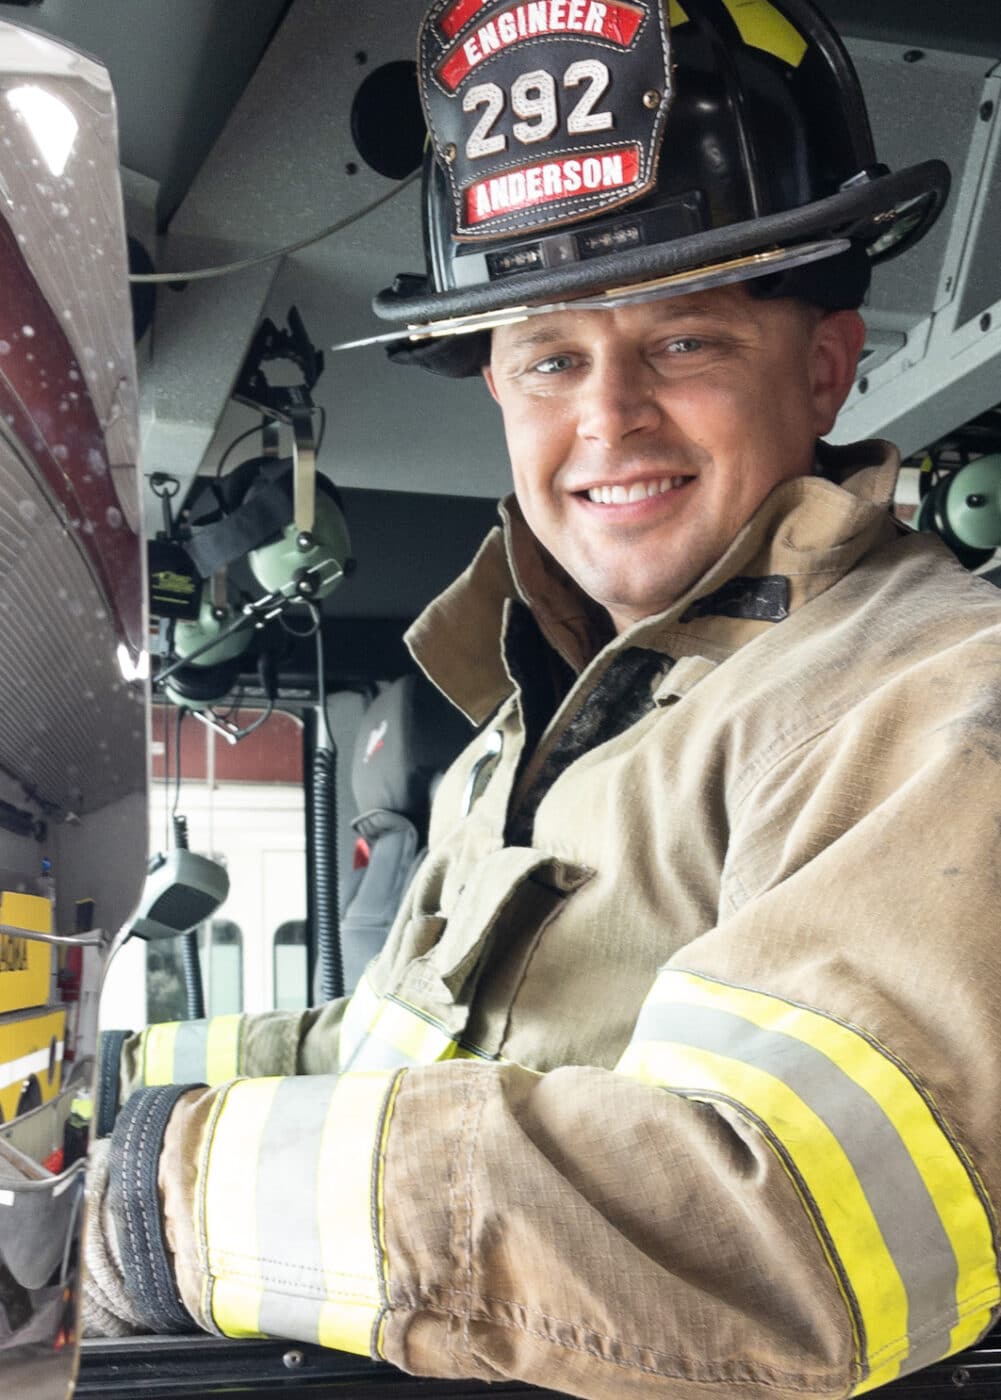 Sen. Neil Anderson on the job as a firefighter